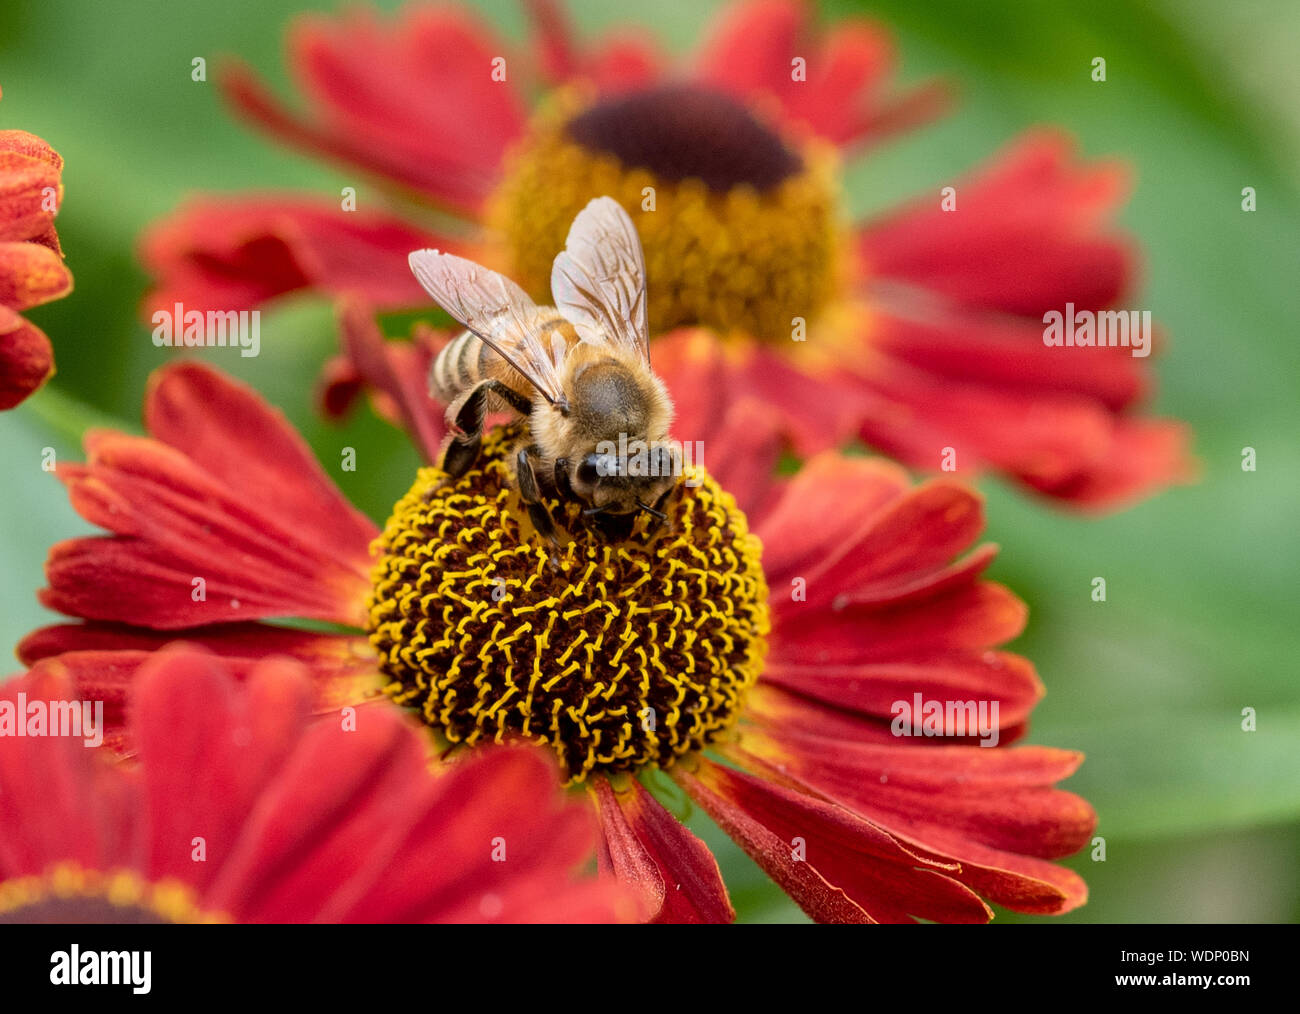 Macro photography close up of a honey bee collecting pollen on a red Helenium flower Stock Photo